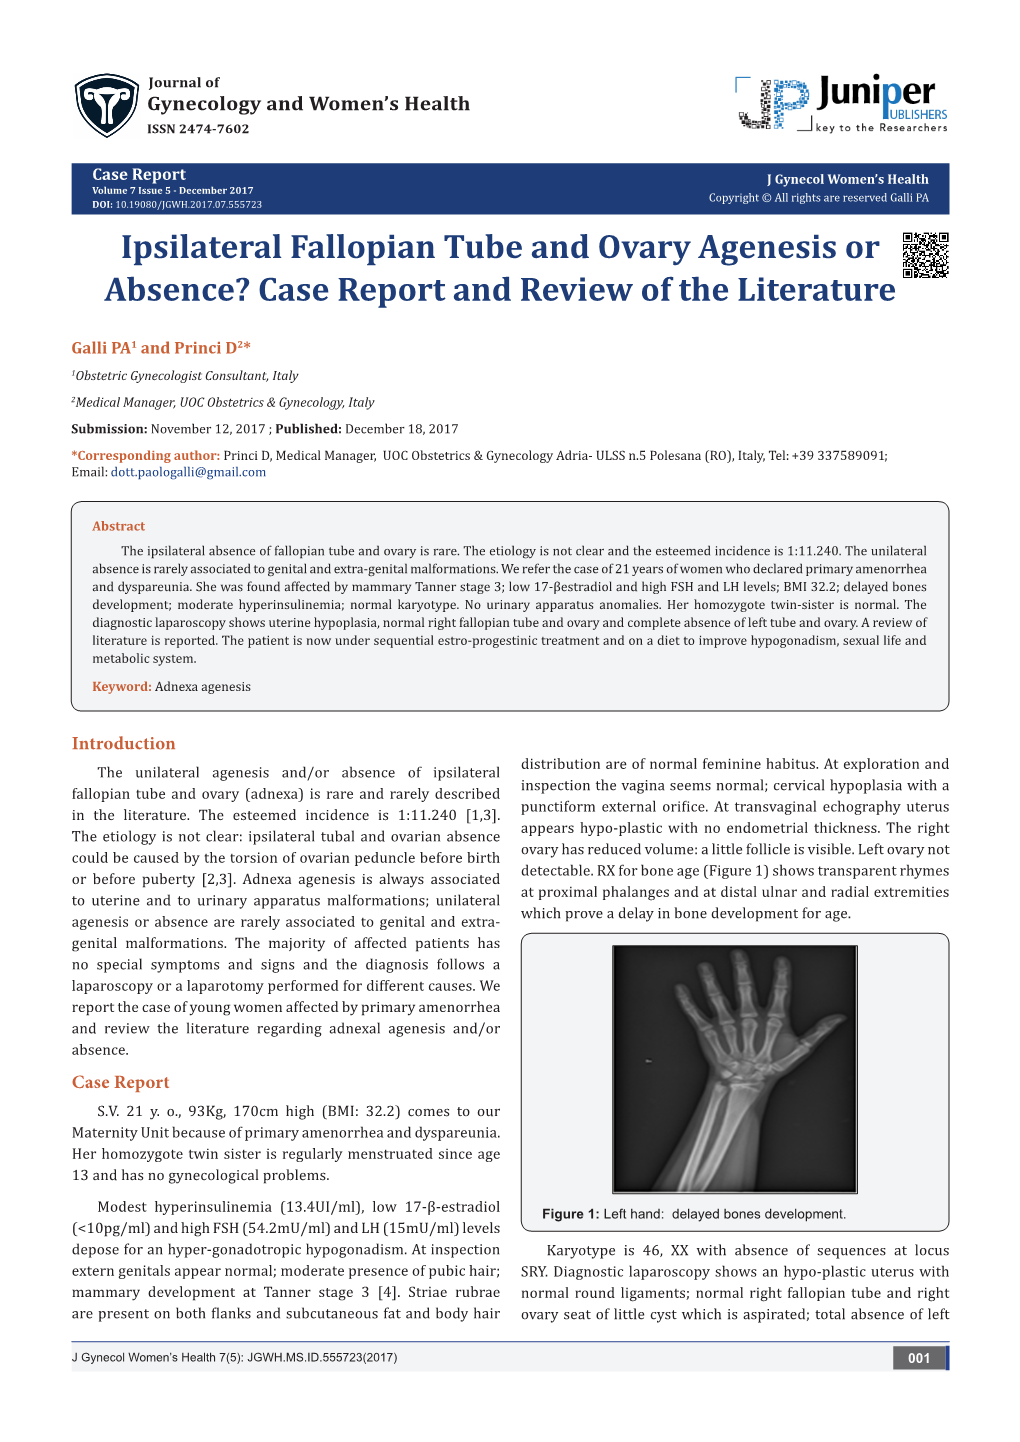 Ipsilateral Fallopian Tube and Ovary Agenesis Or Absence? Case Report and Review of the Literature